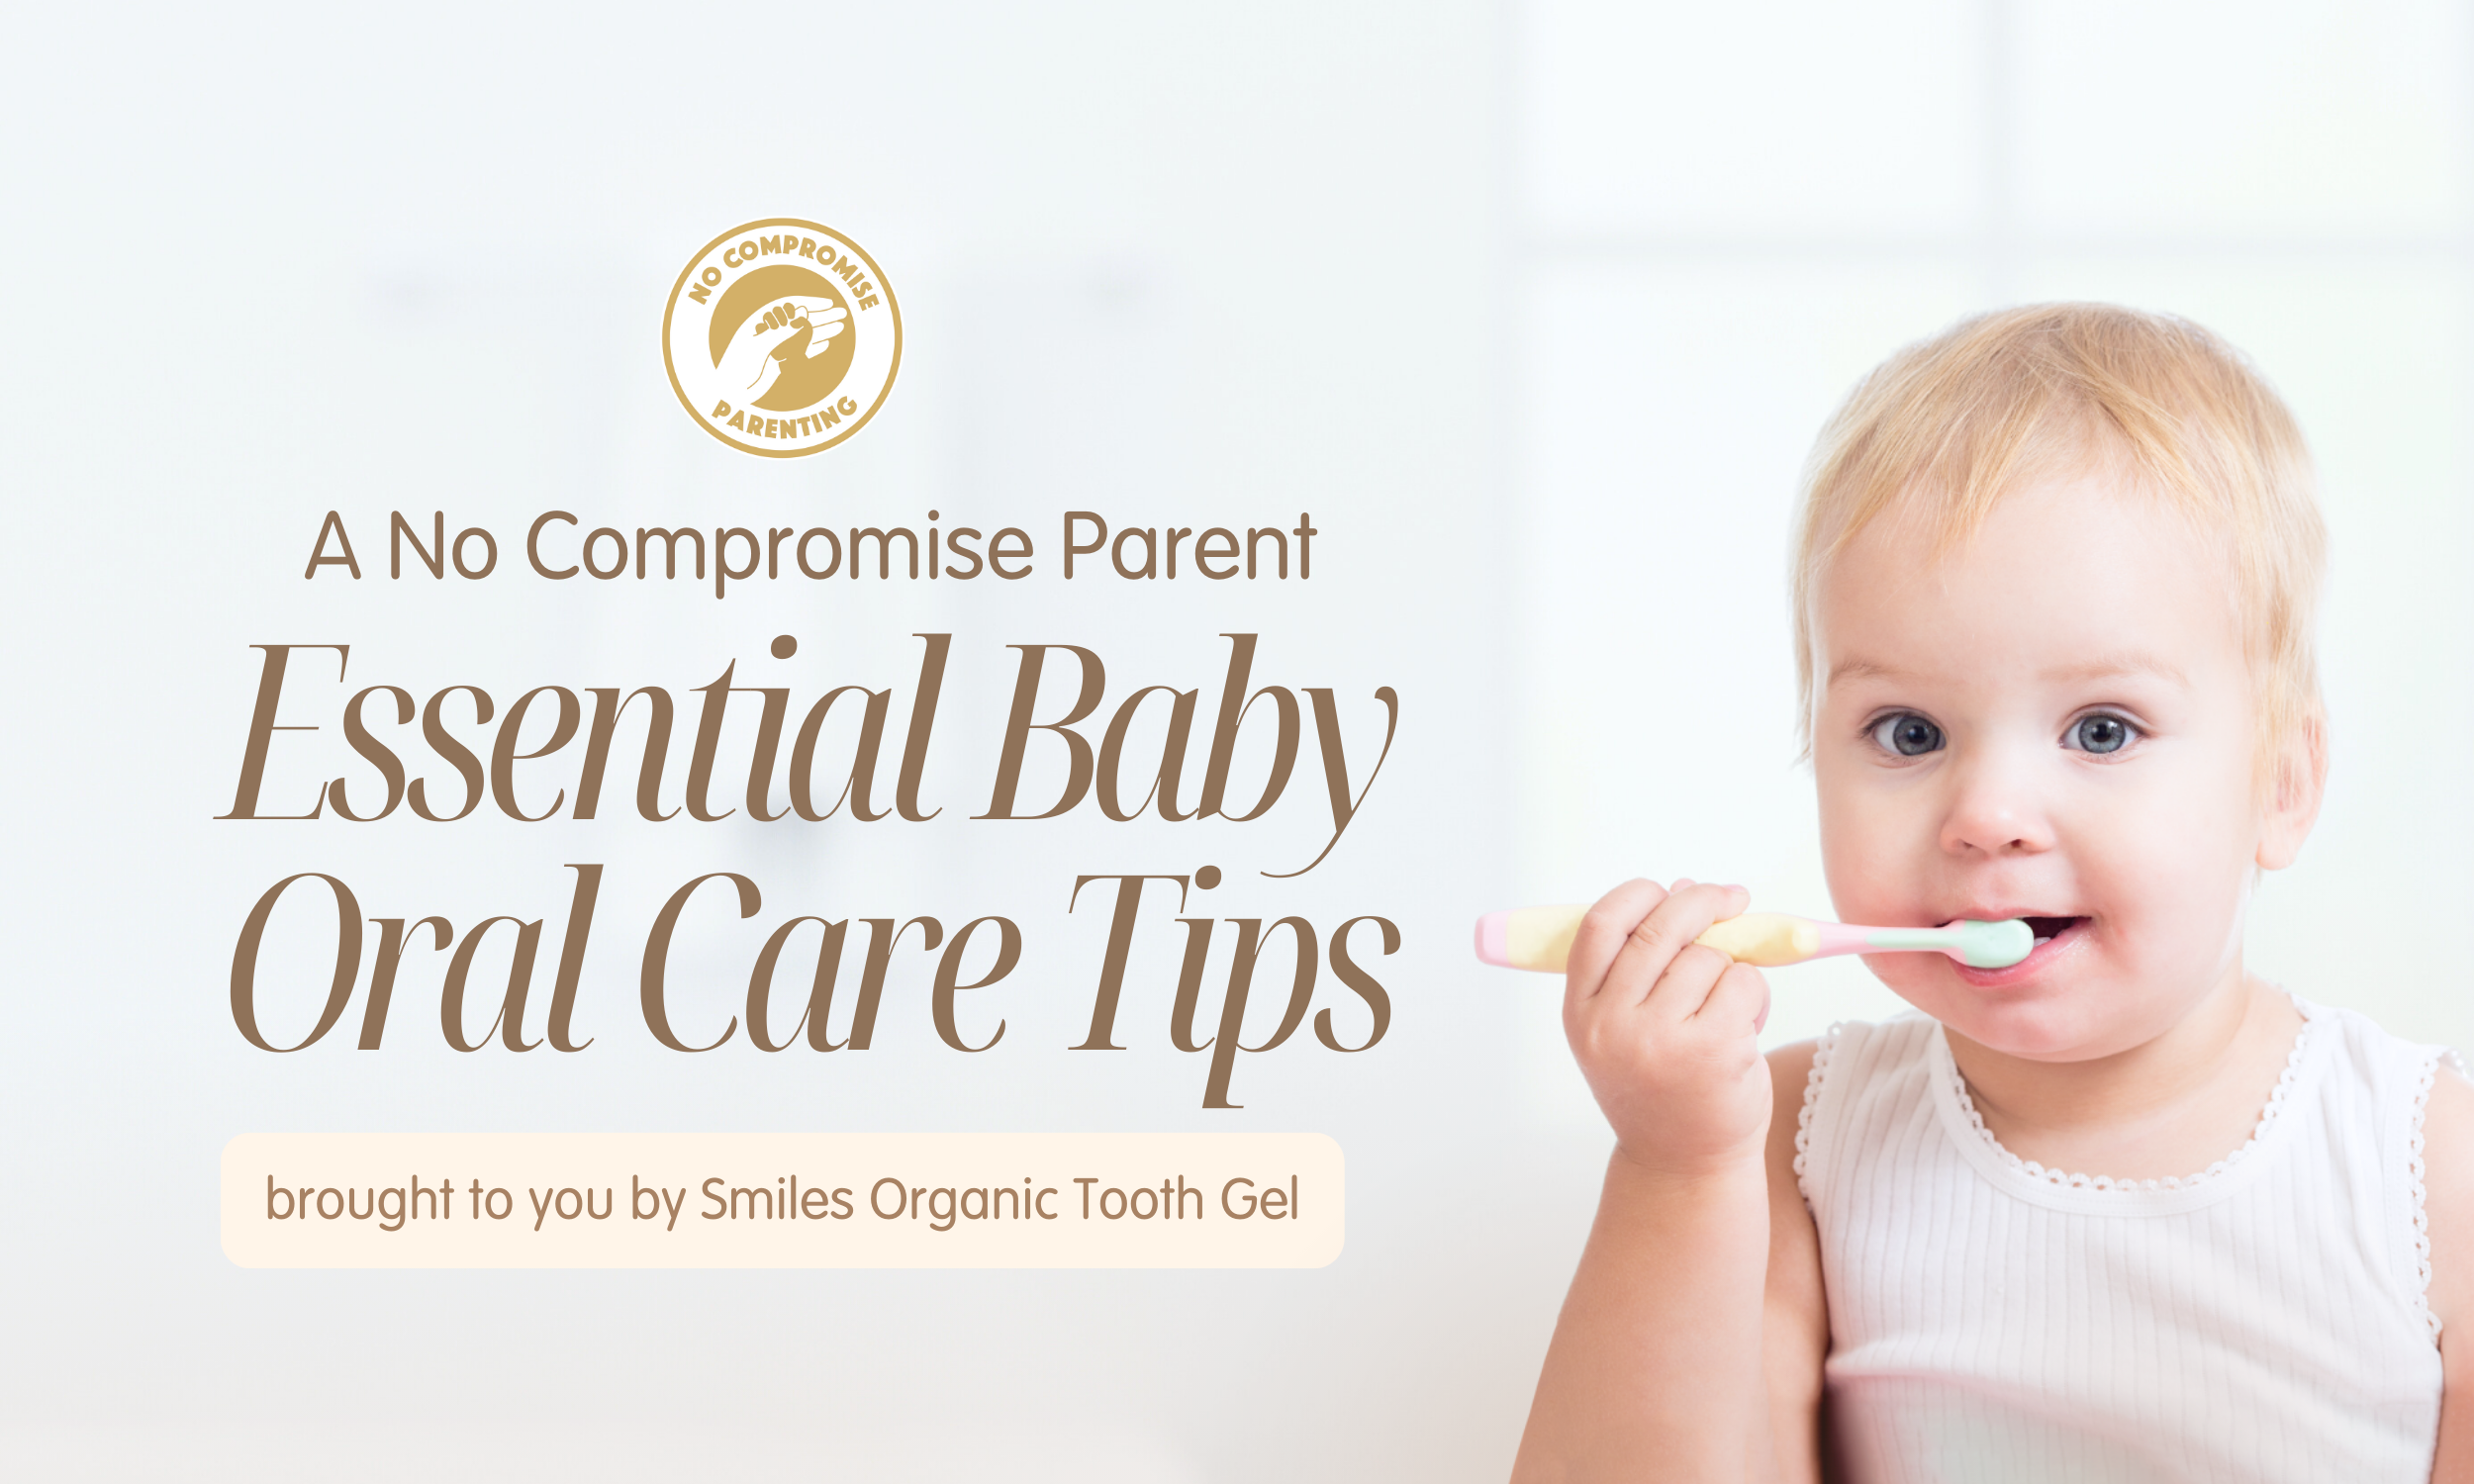 Essential Baby Oral Care Tips for No Compromise Parents